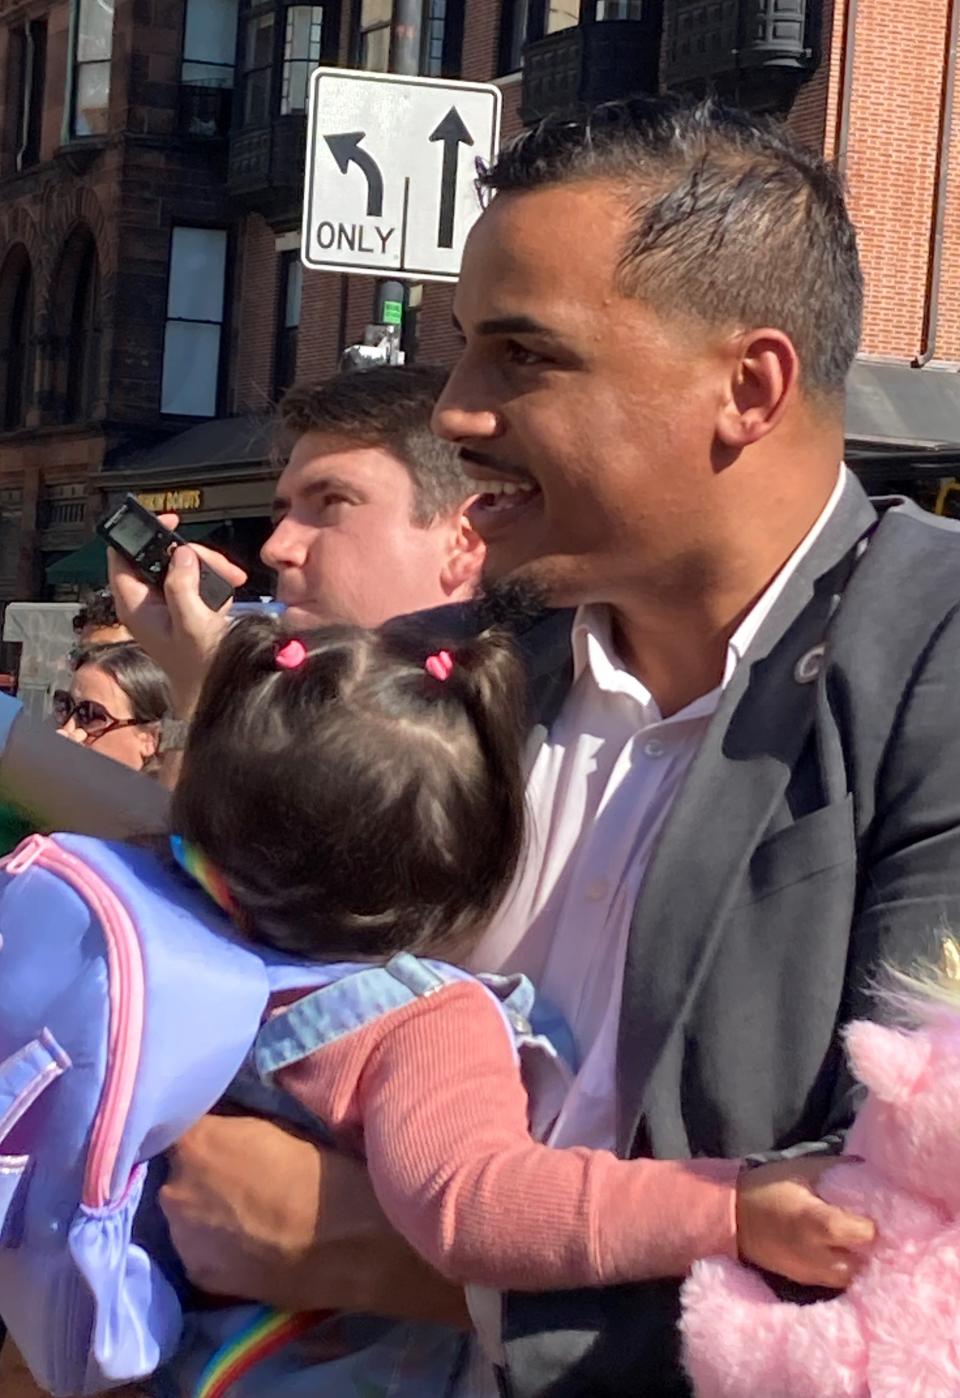 Rep. Manny Cruz, D-Salem, attended the rally Thursday with his daughter Ivy, who was delivered by a midwife, Esther Hausman, of Concord.